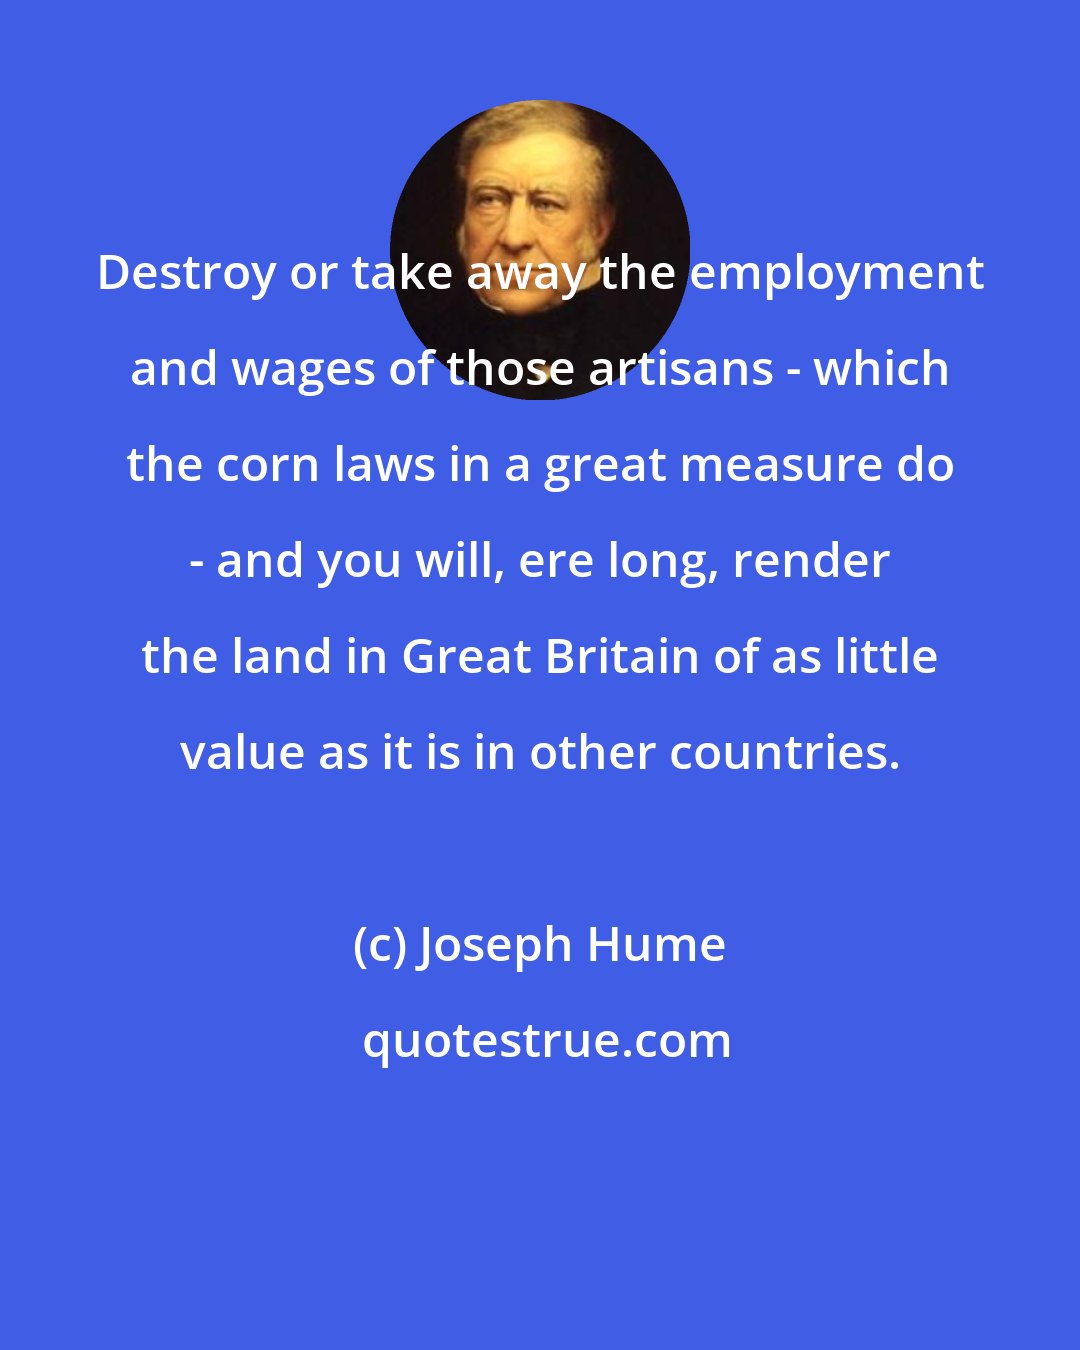 Joseph Hume: Destroy or take away the employment and wages of those artisans - which the corn laws in a great measure do - and you will, ere long, render the land in Great Britain of as little value as it is in other countries.